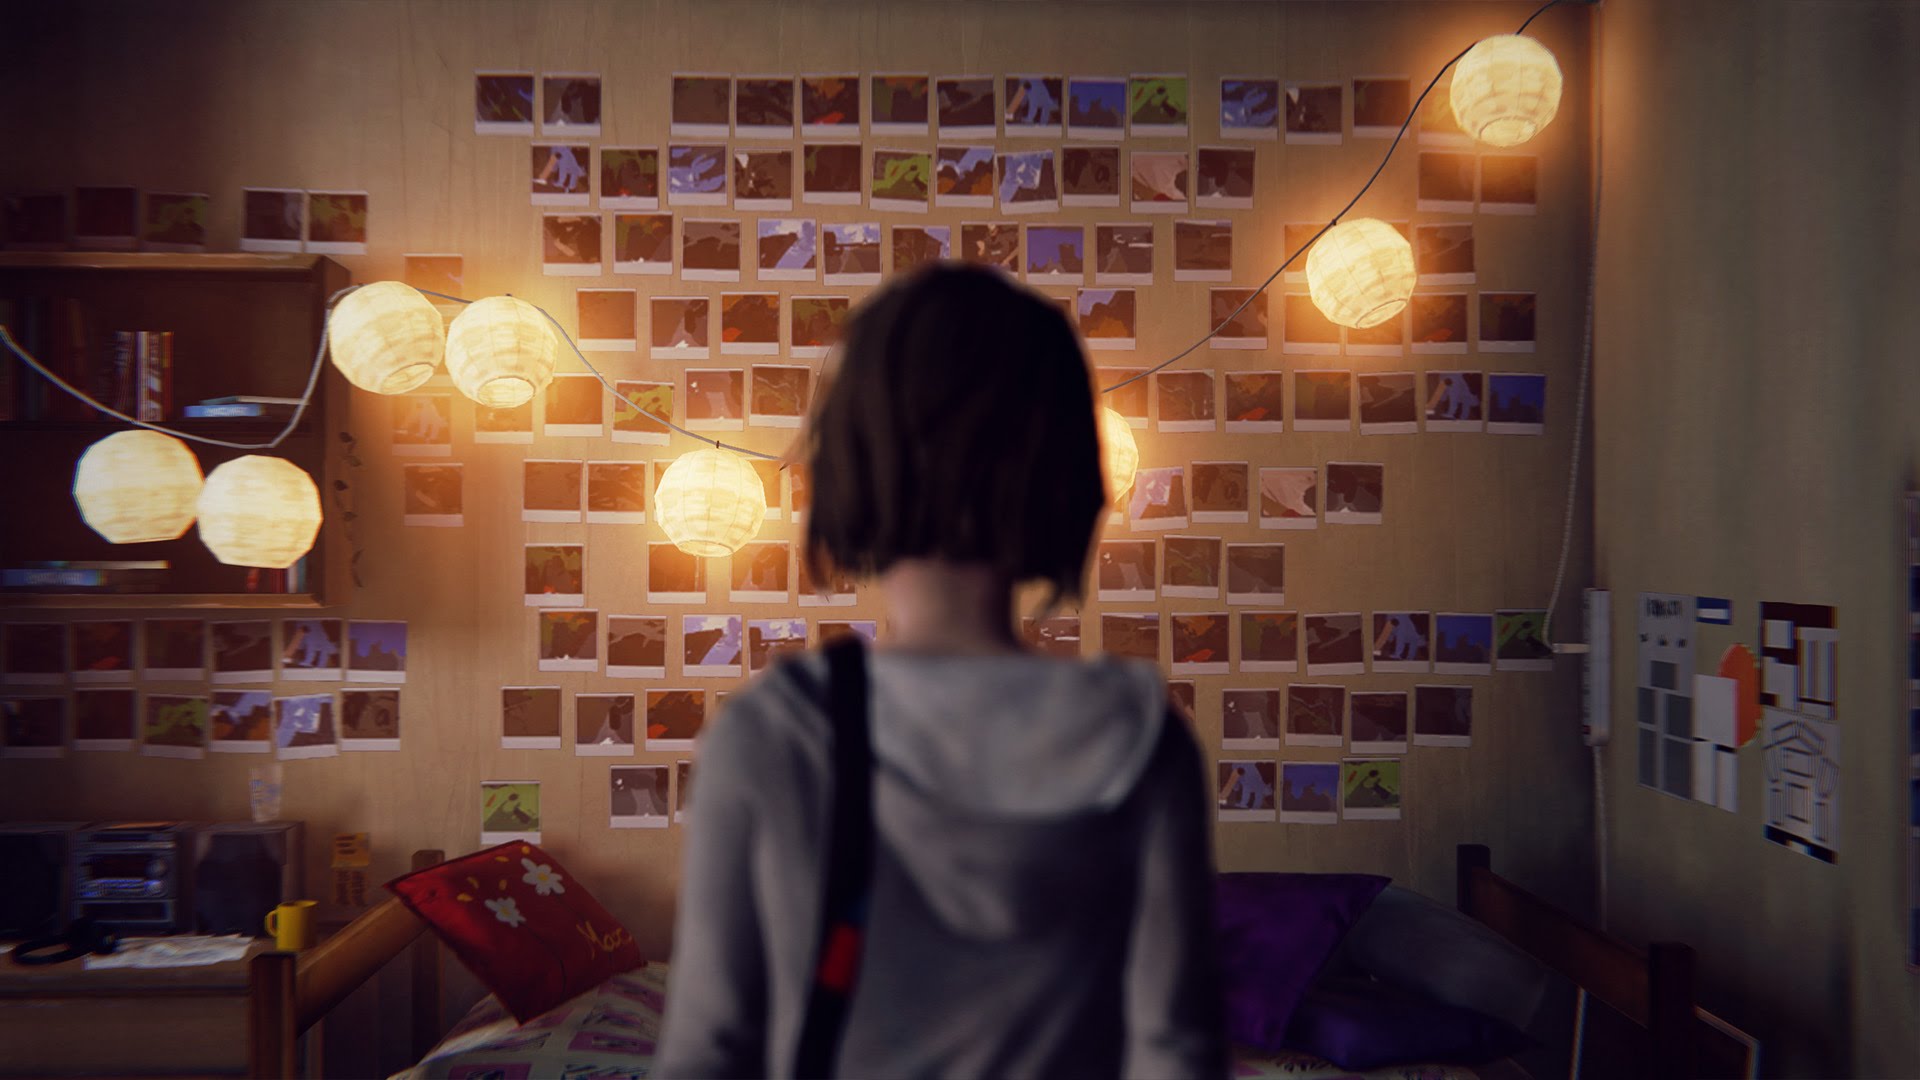 “Life Is Strange’s” Final Episode Date Revealed - Time to Conclude On This Strange Life